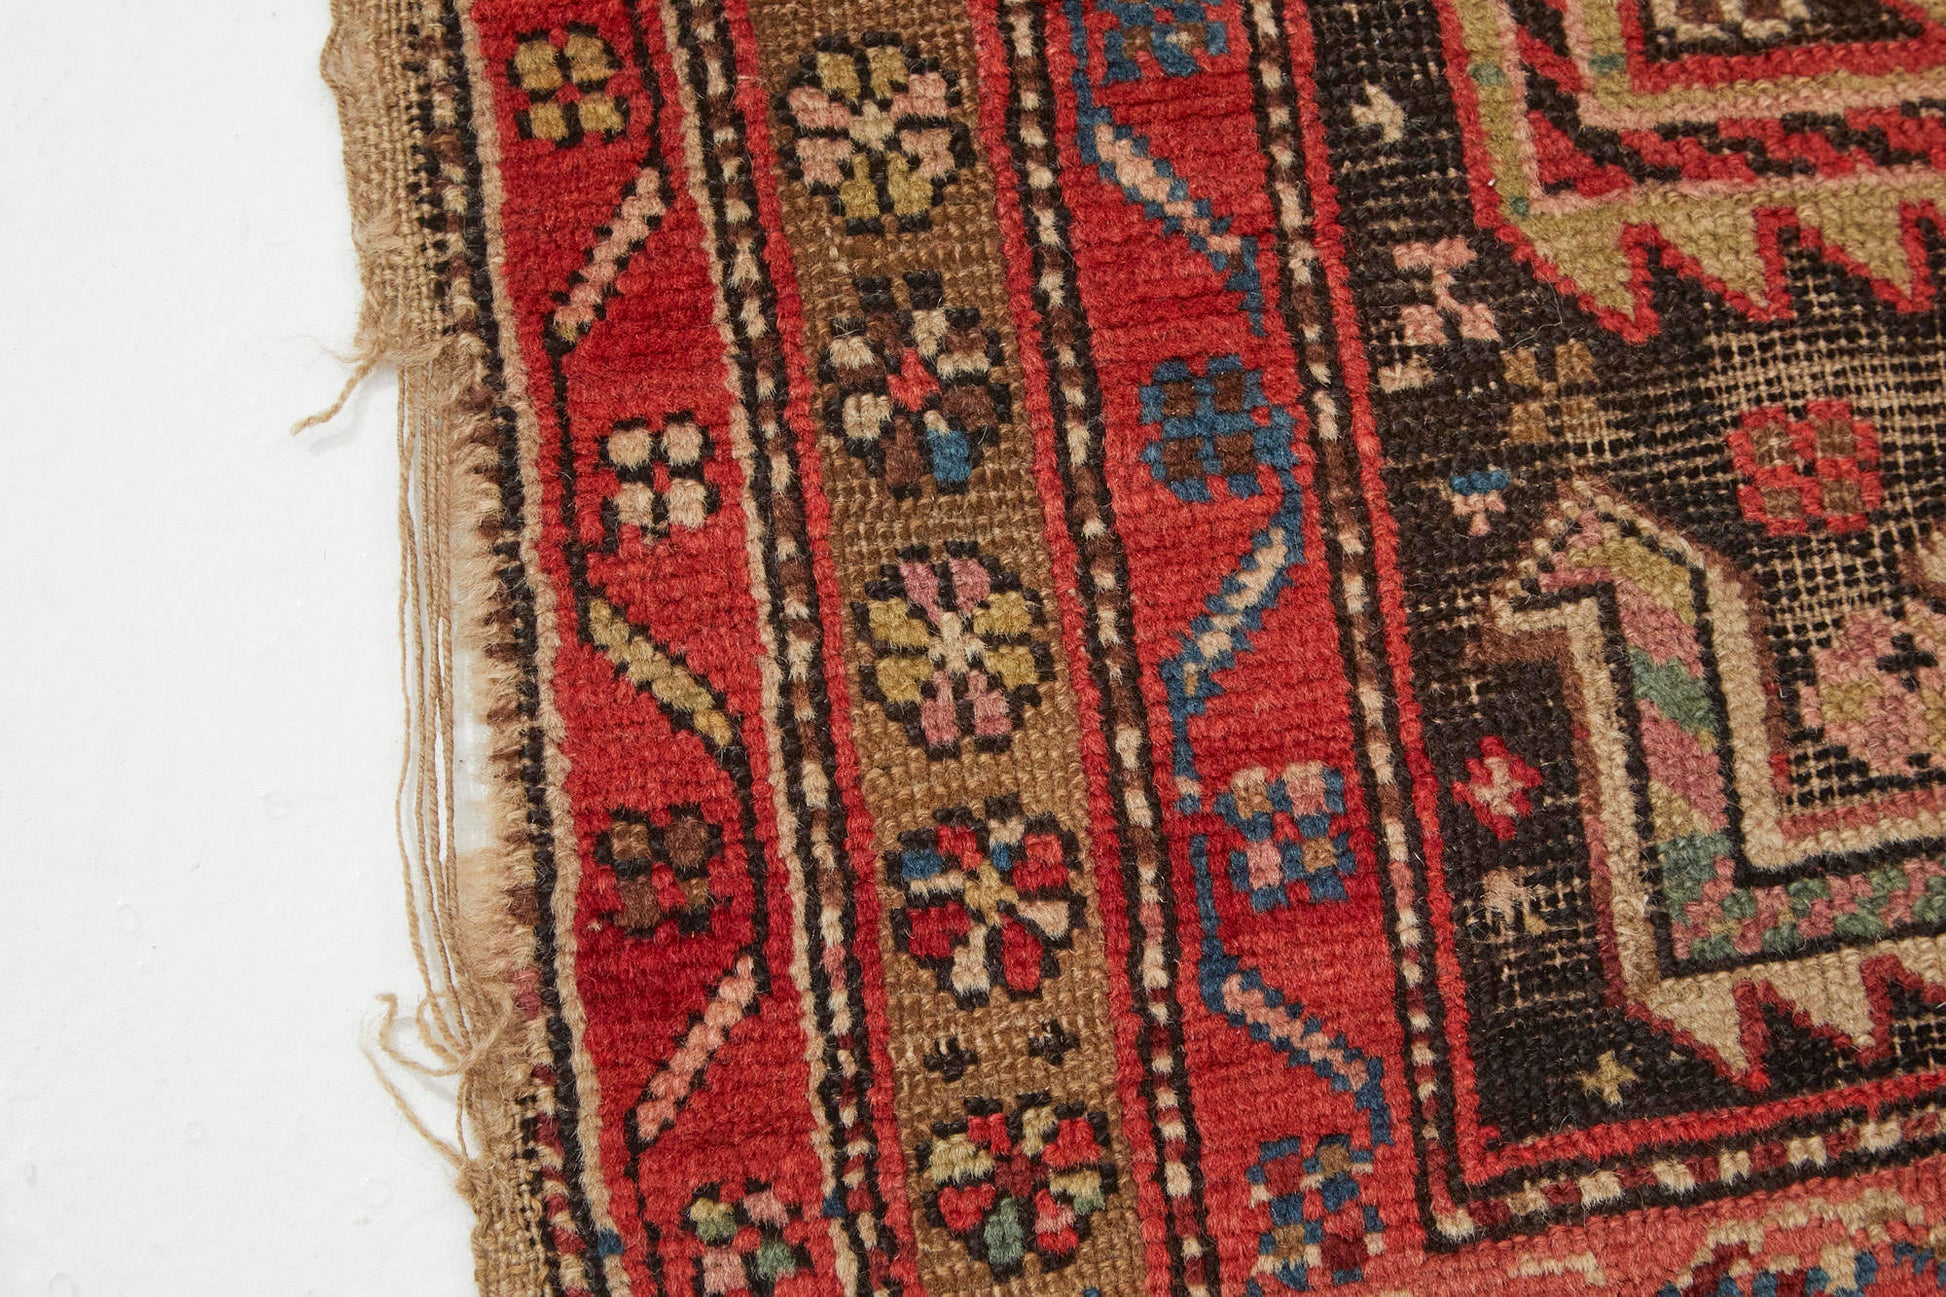 hand woven antique Akstafa Prayer Rug in red, tan, dark brown, blue and cream colors - Available from King Kennedy Rugs Los Angeles